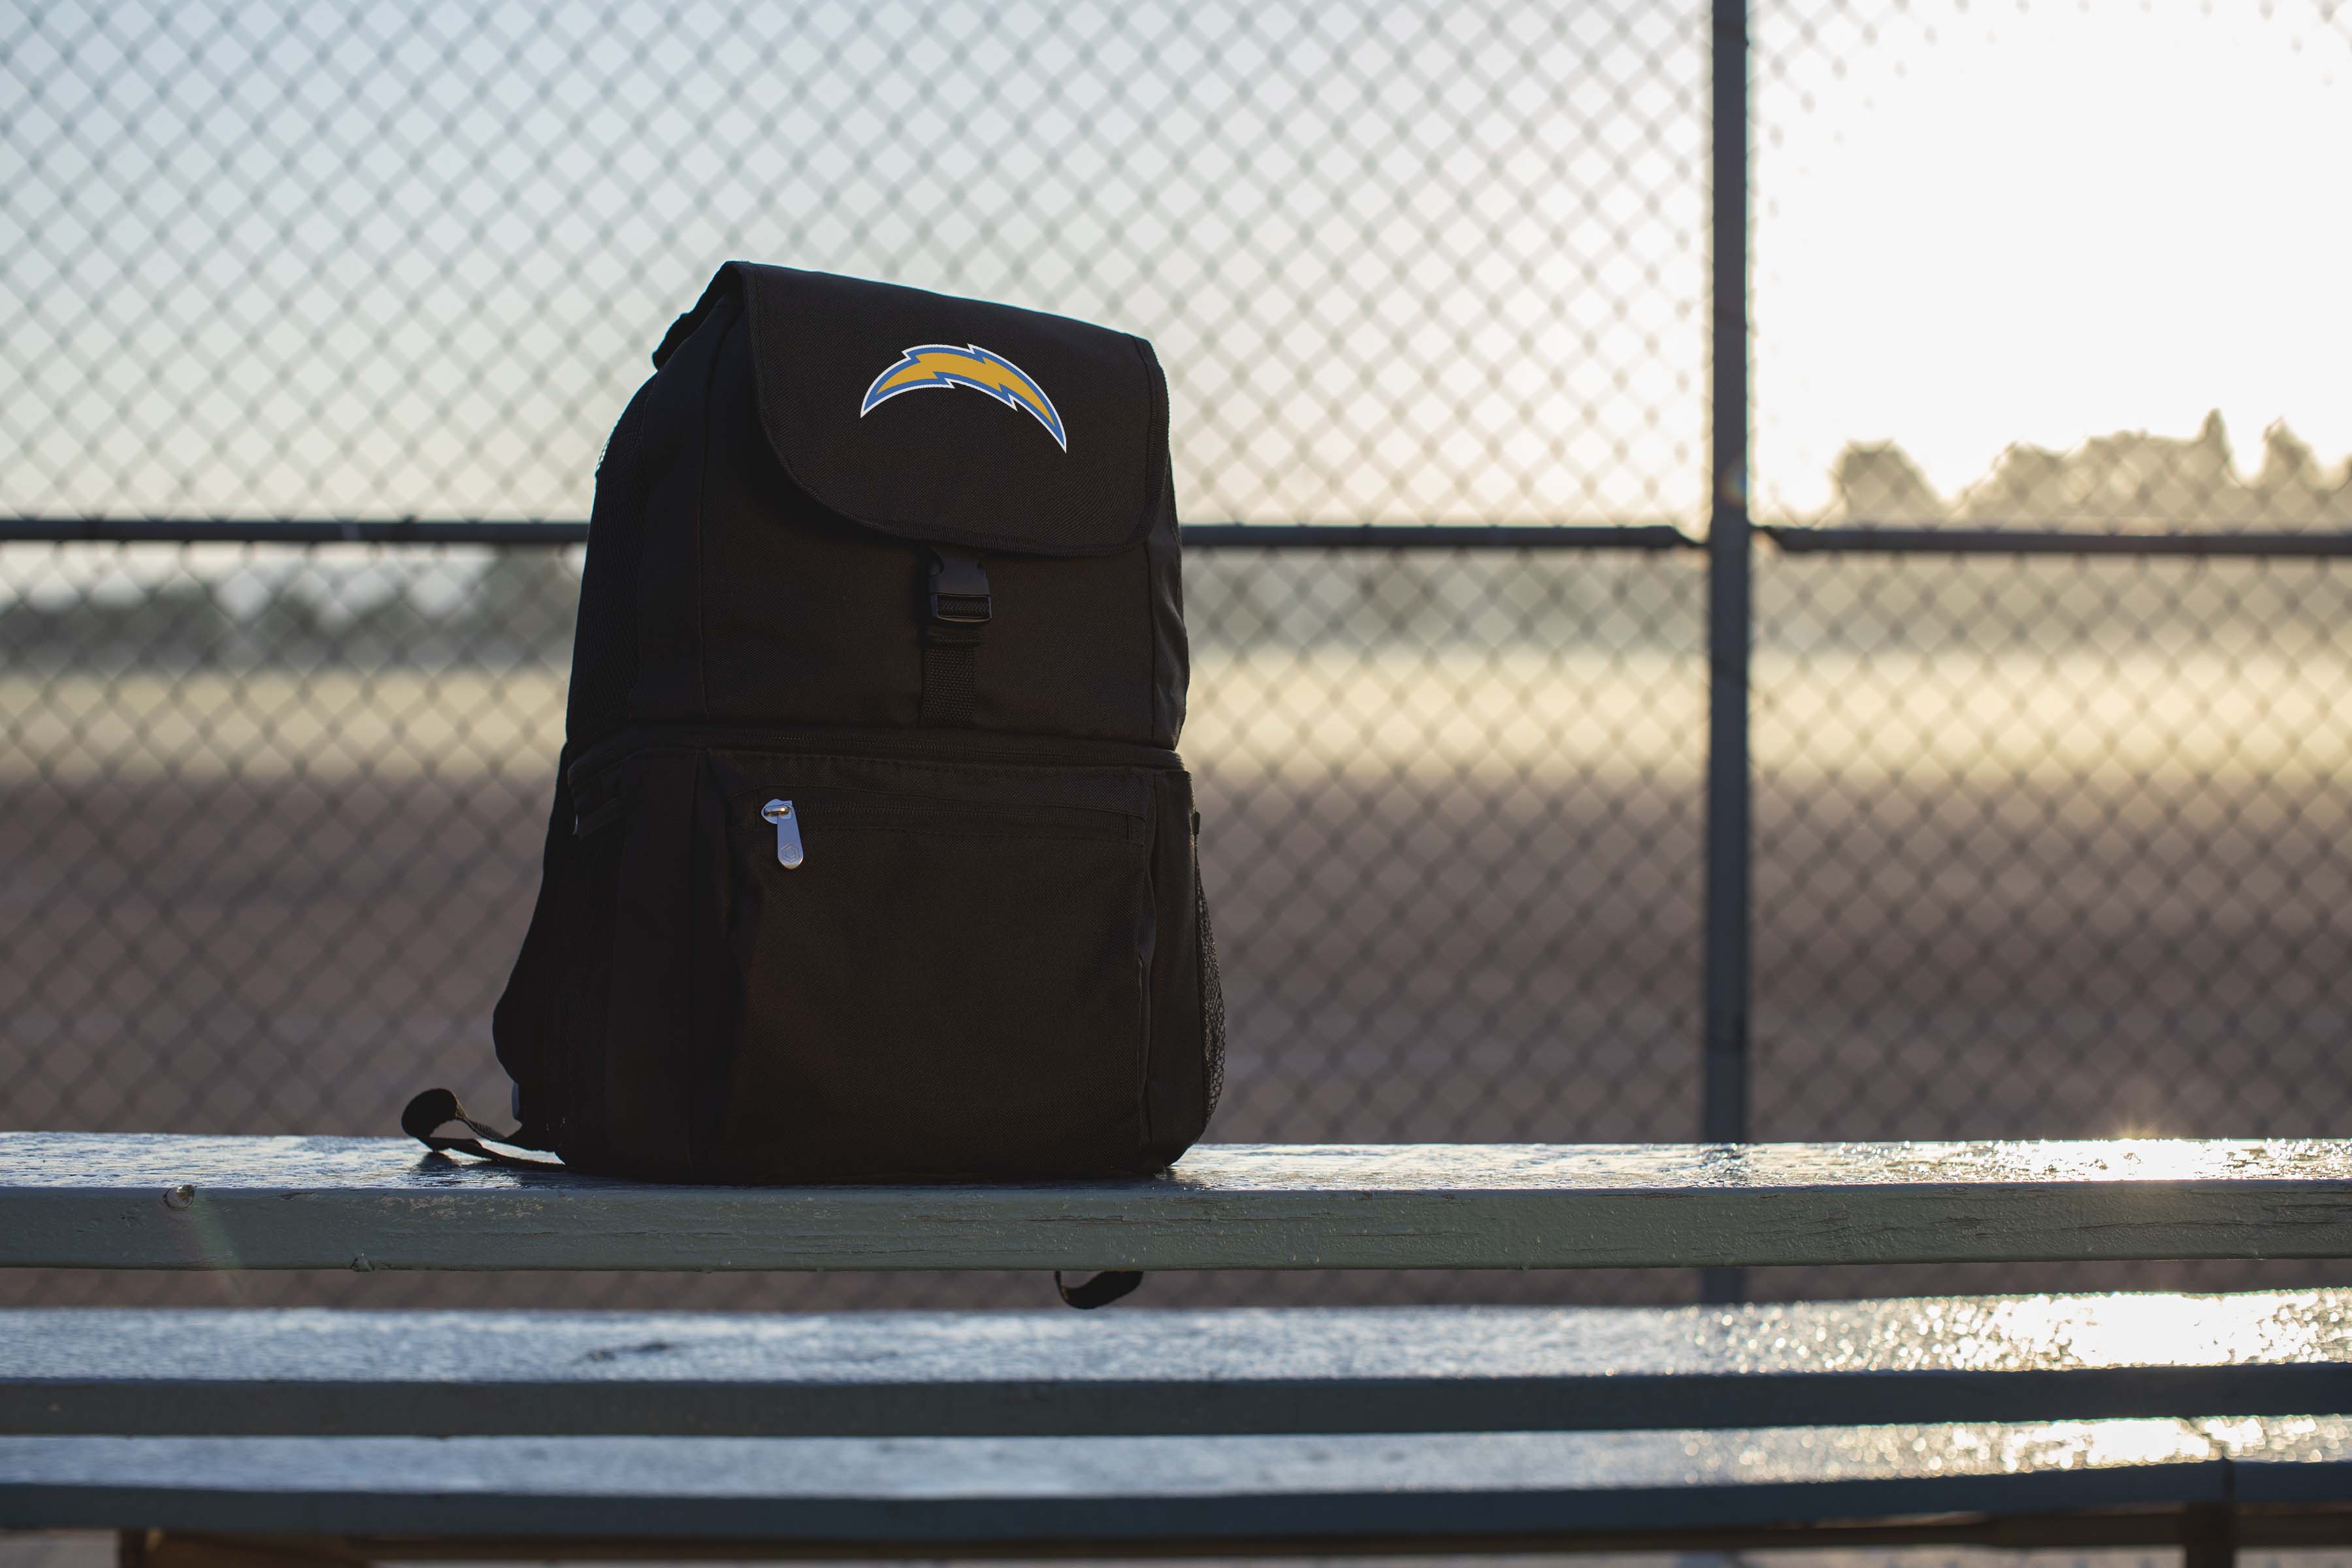 Los Angeles Chargers - Zuma Backpack Cooler